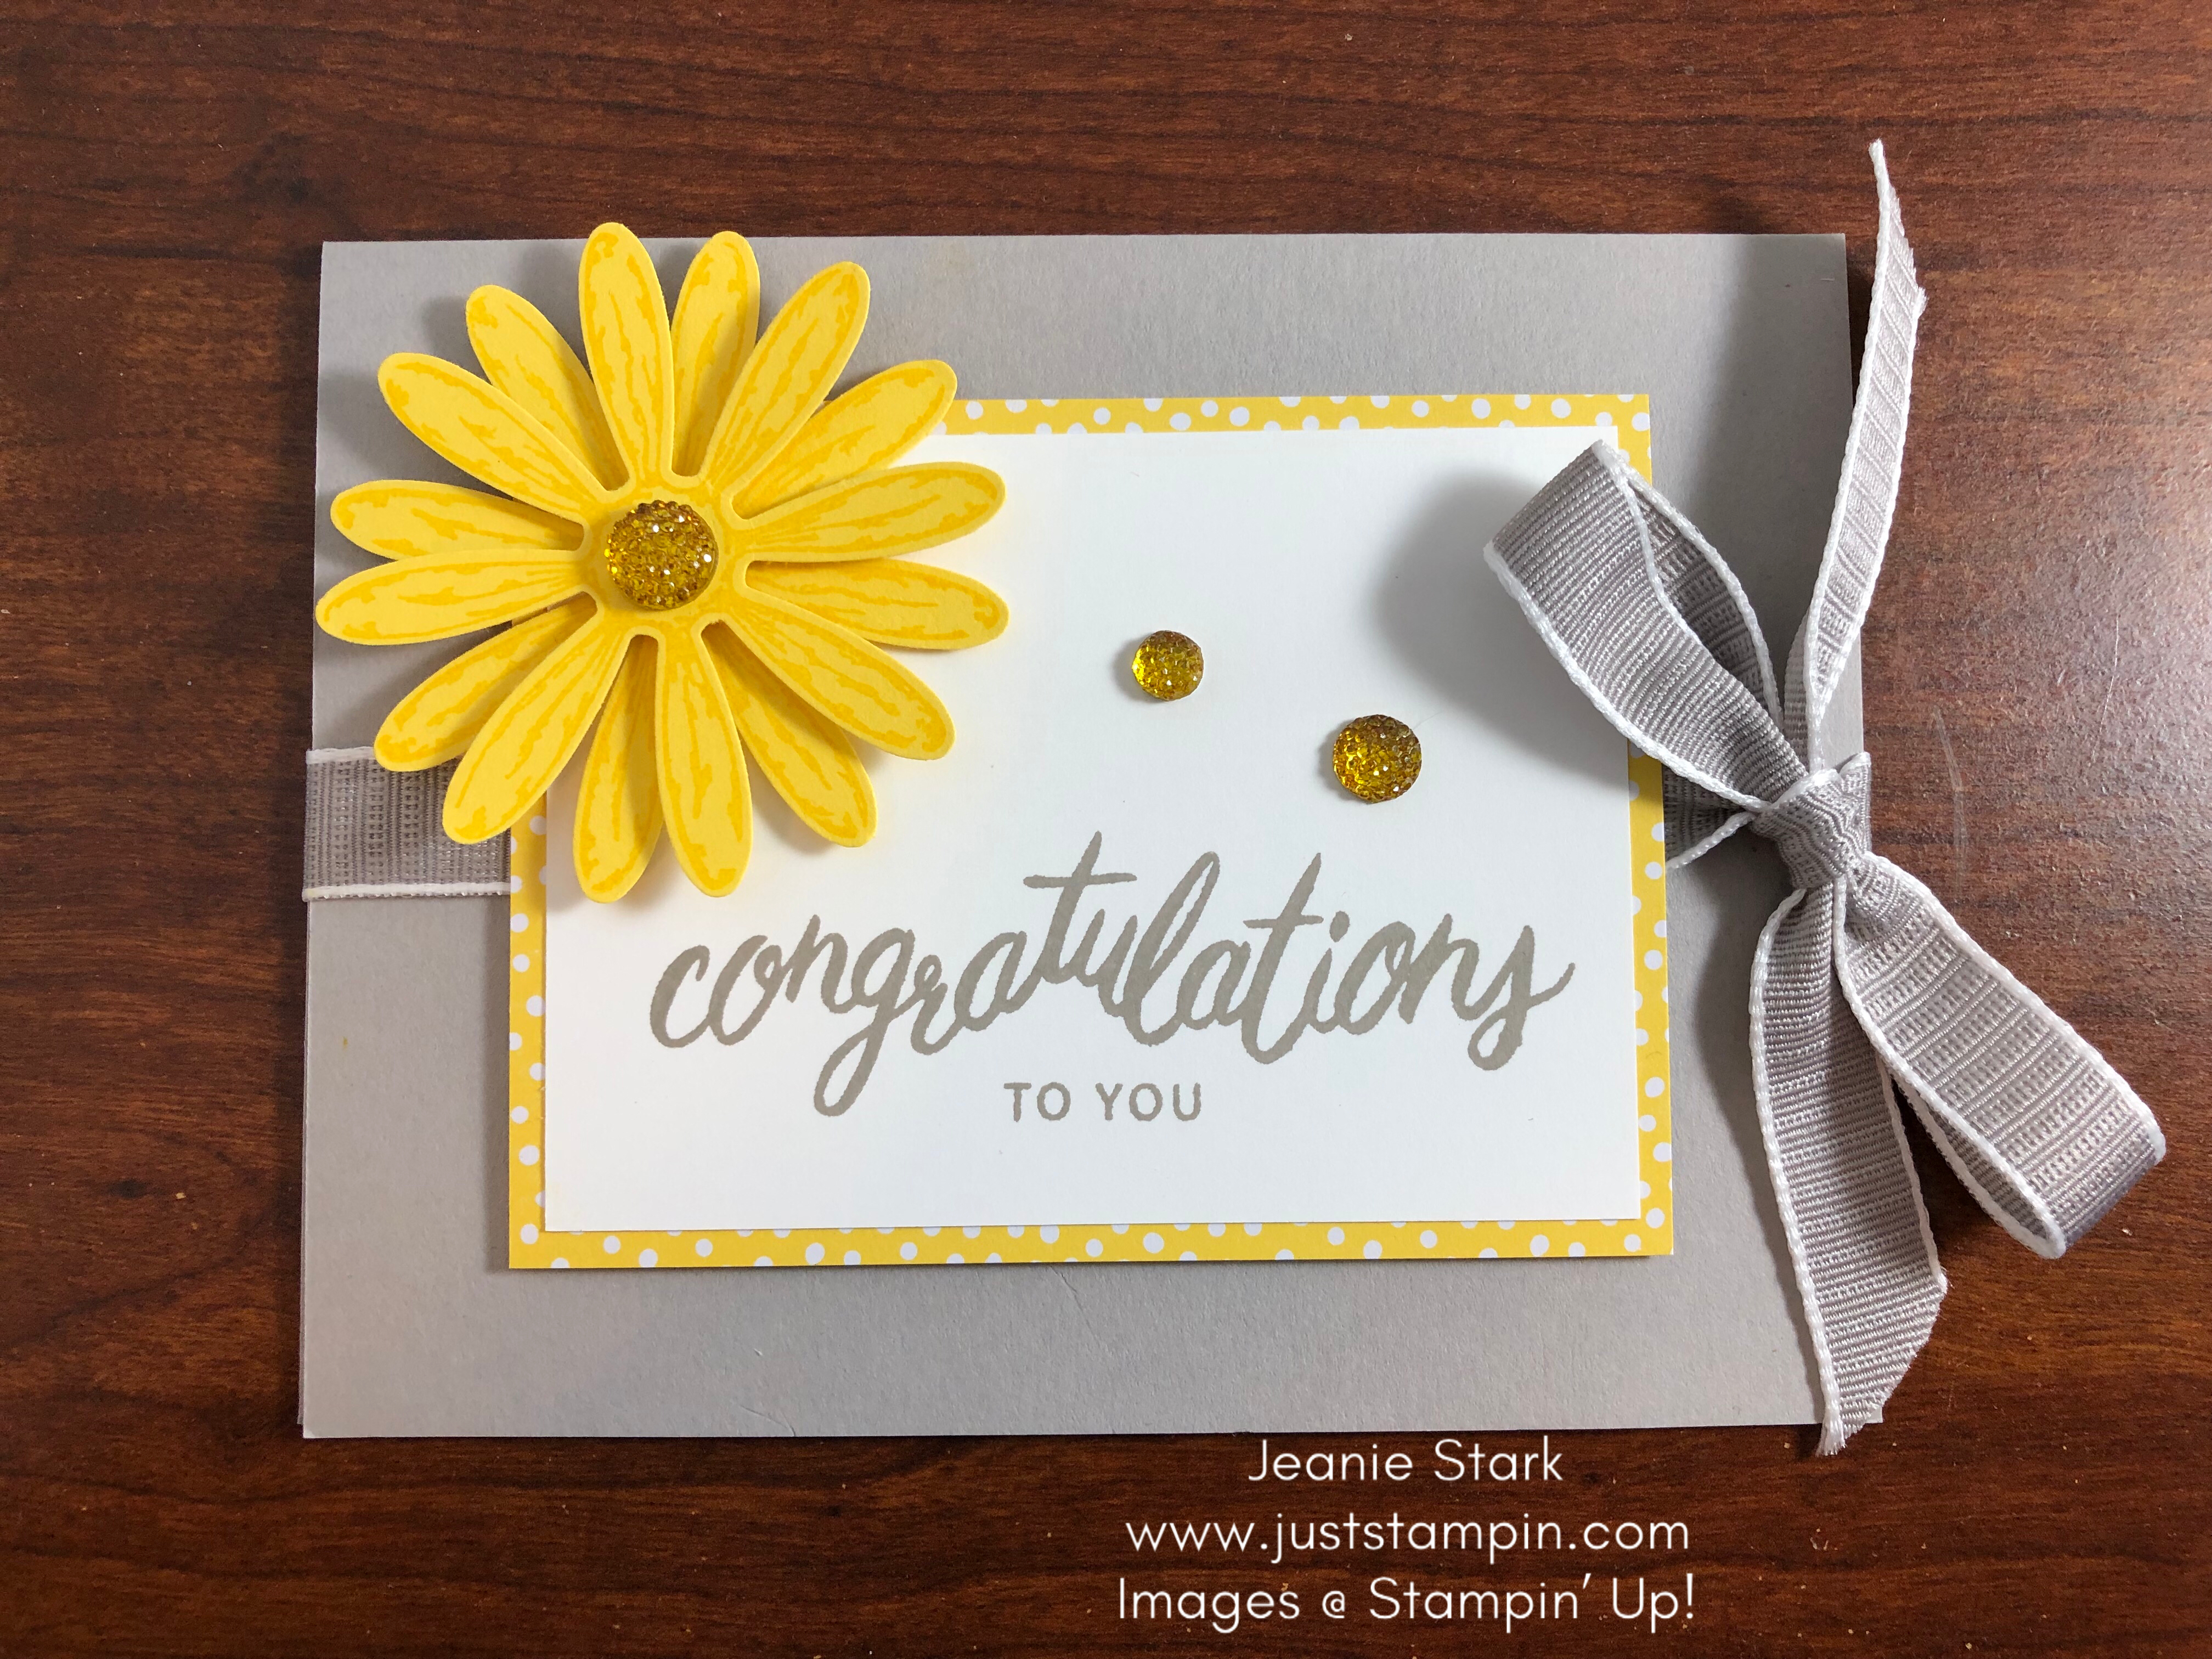 Stampin' Up! Friendly Expressions congratulation gift card/ money holder idea - Jeanie Stark StampinUp